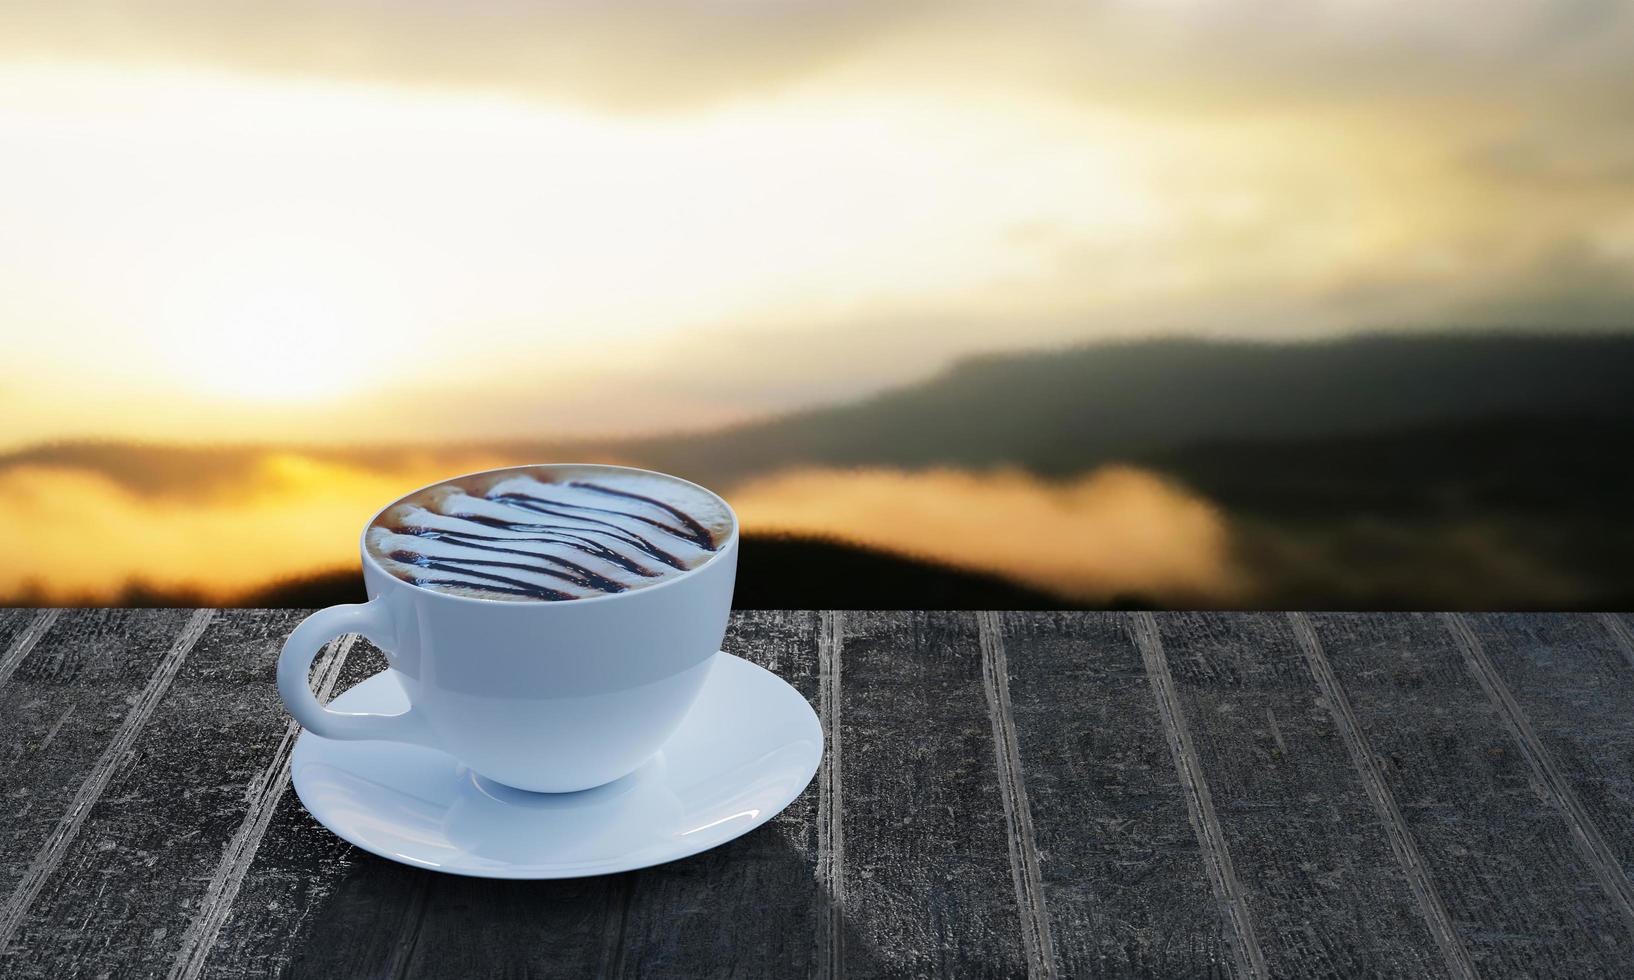 Latte art coffee, milk foam topped with chocolate sauce In a white mug On the slat table The background is a blurry mountain image. In the morning and sunshine. 3D Rendering photo